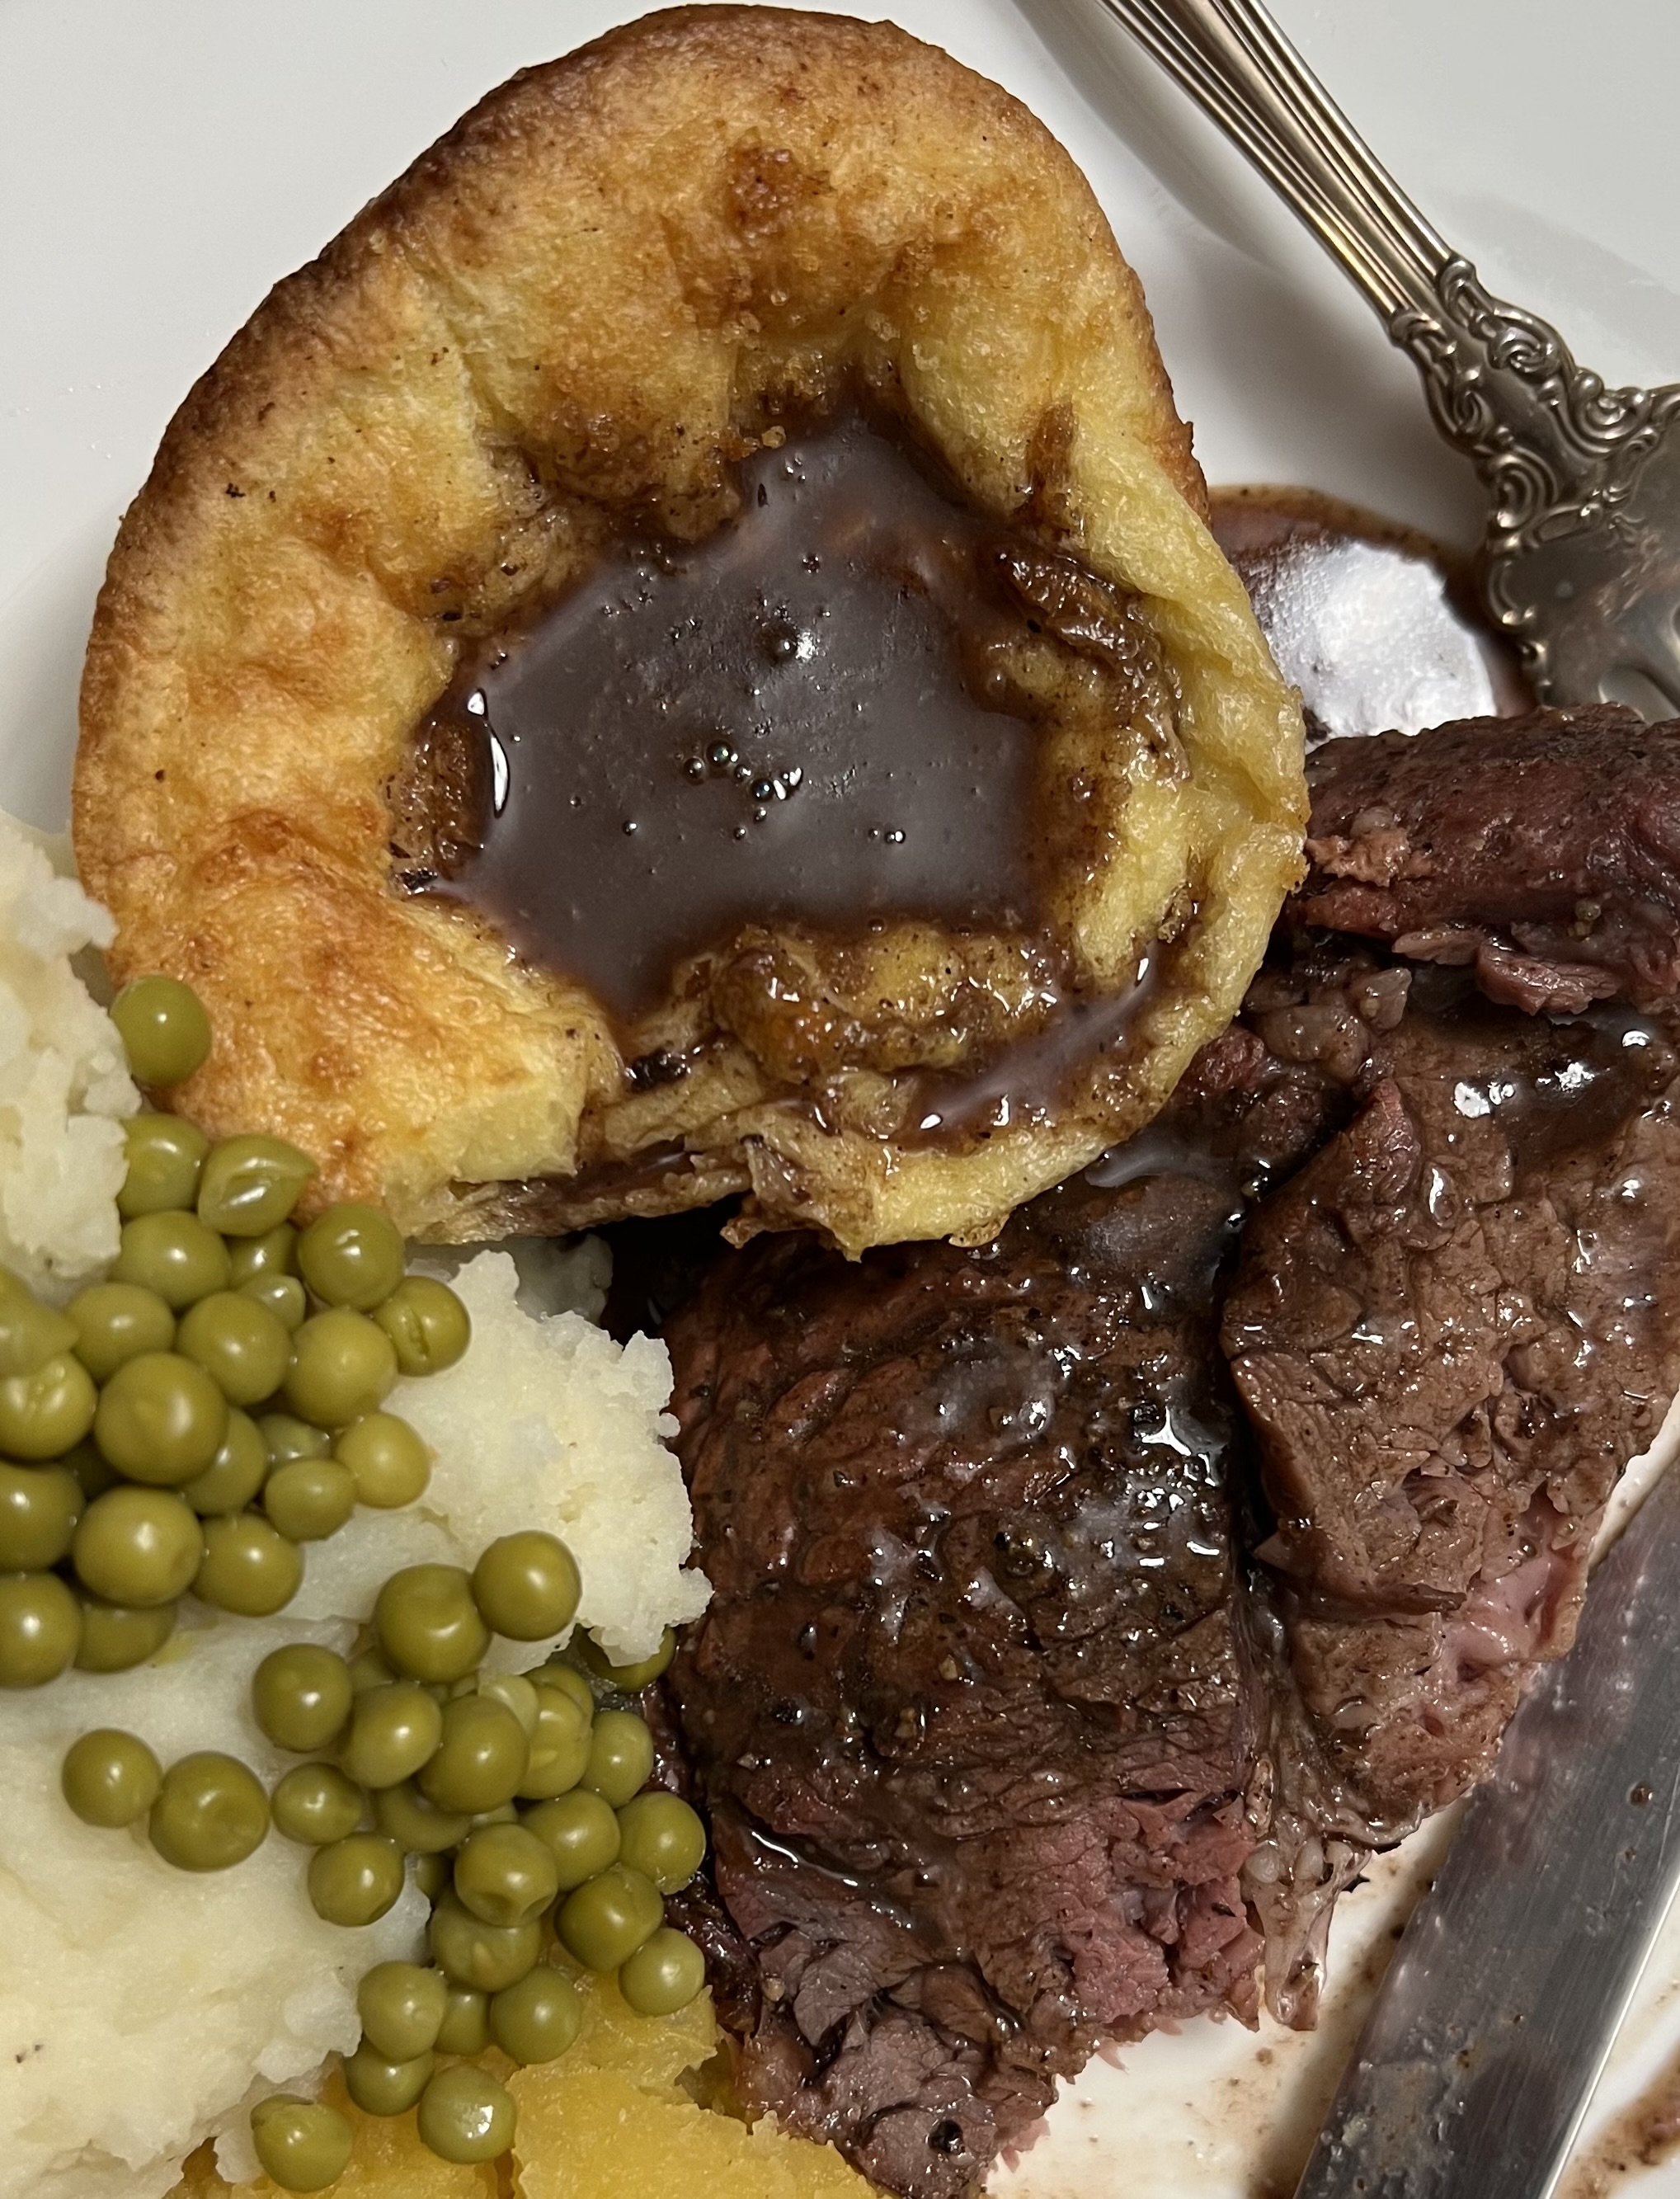 Red wine beef gravy over sliced beef, yorkshire pudding, mashed potatoes and peas